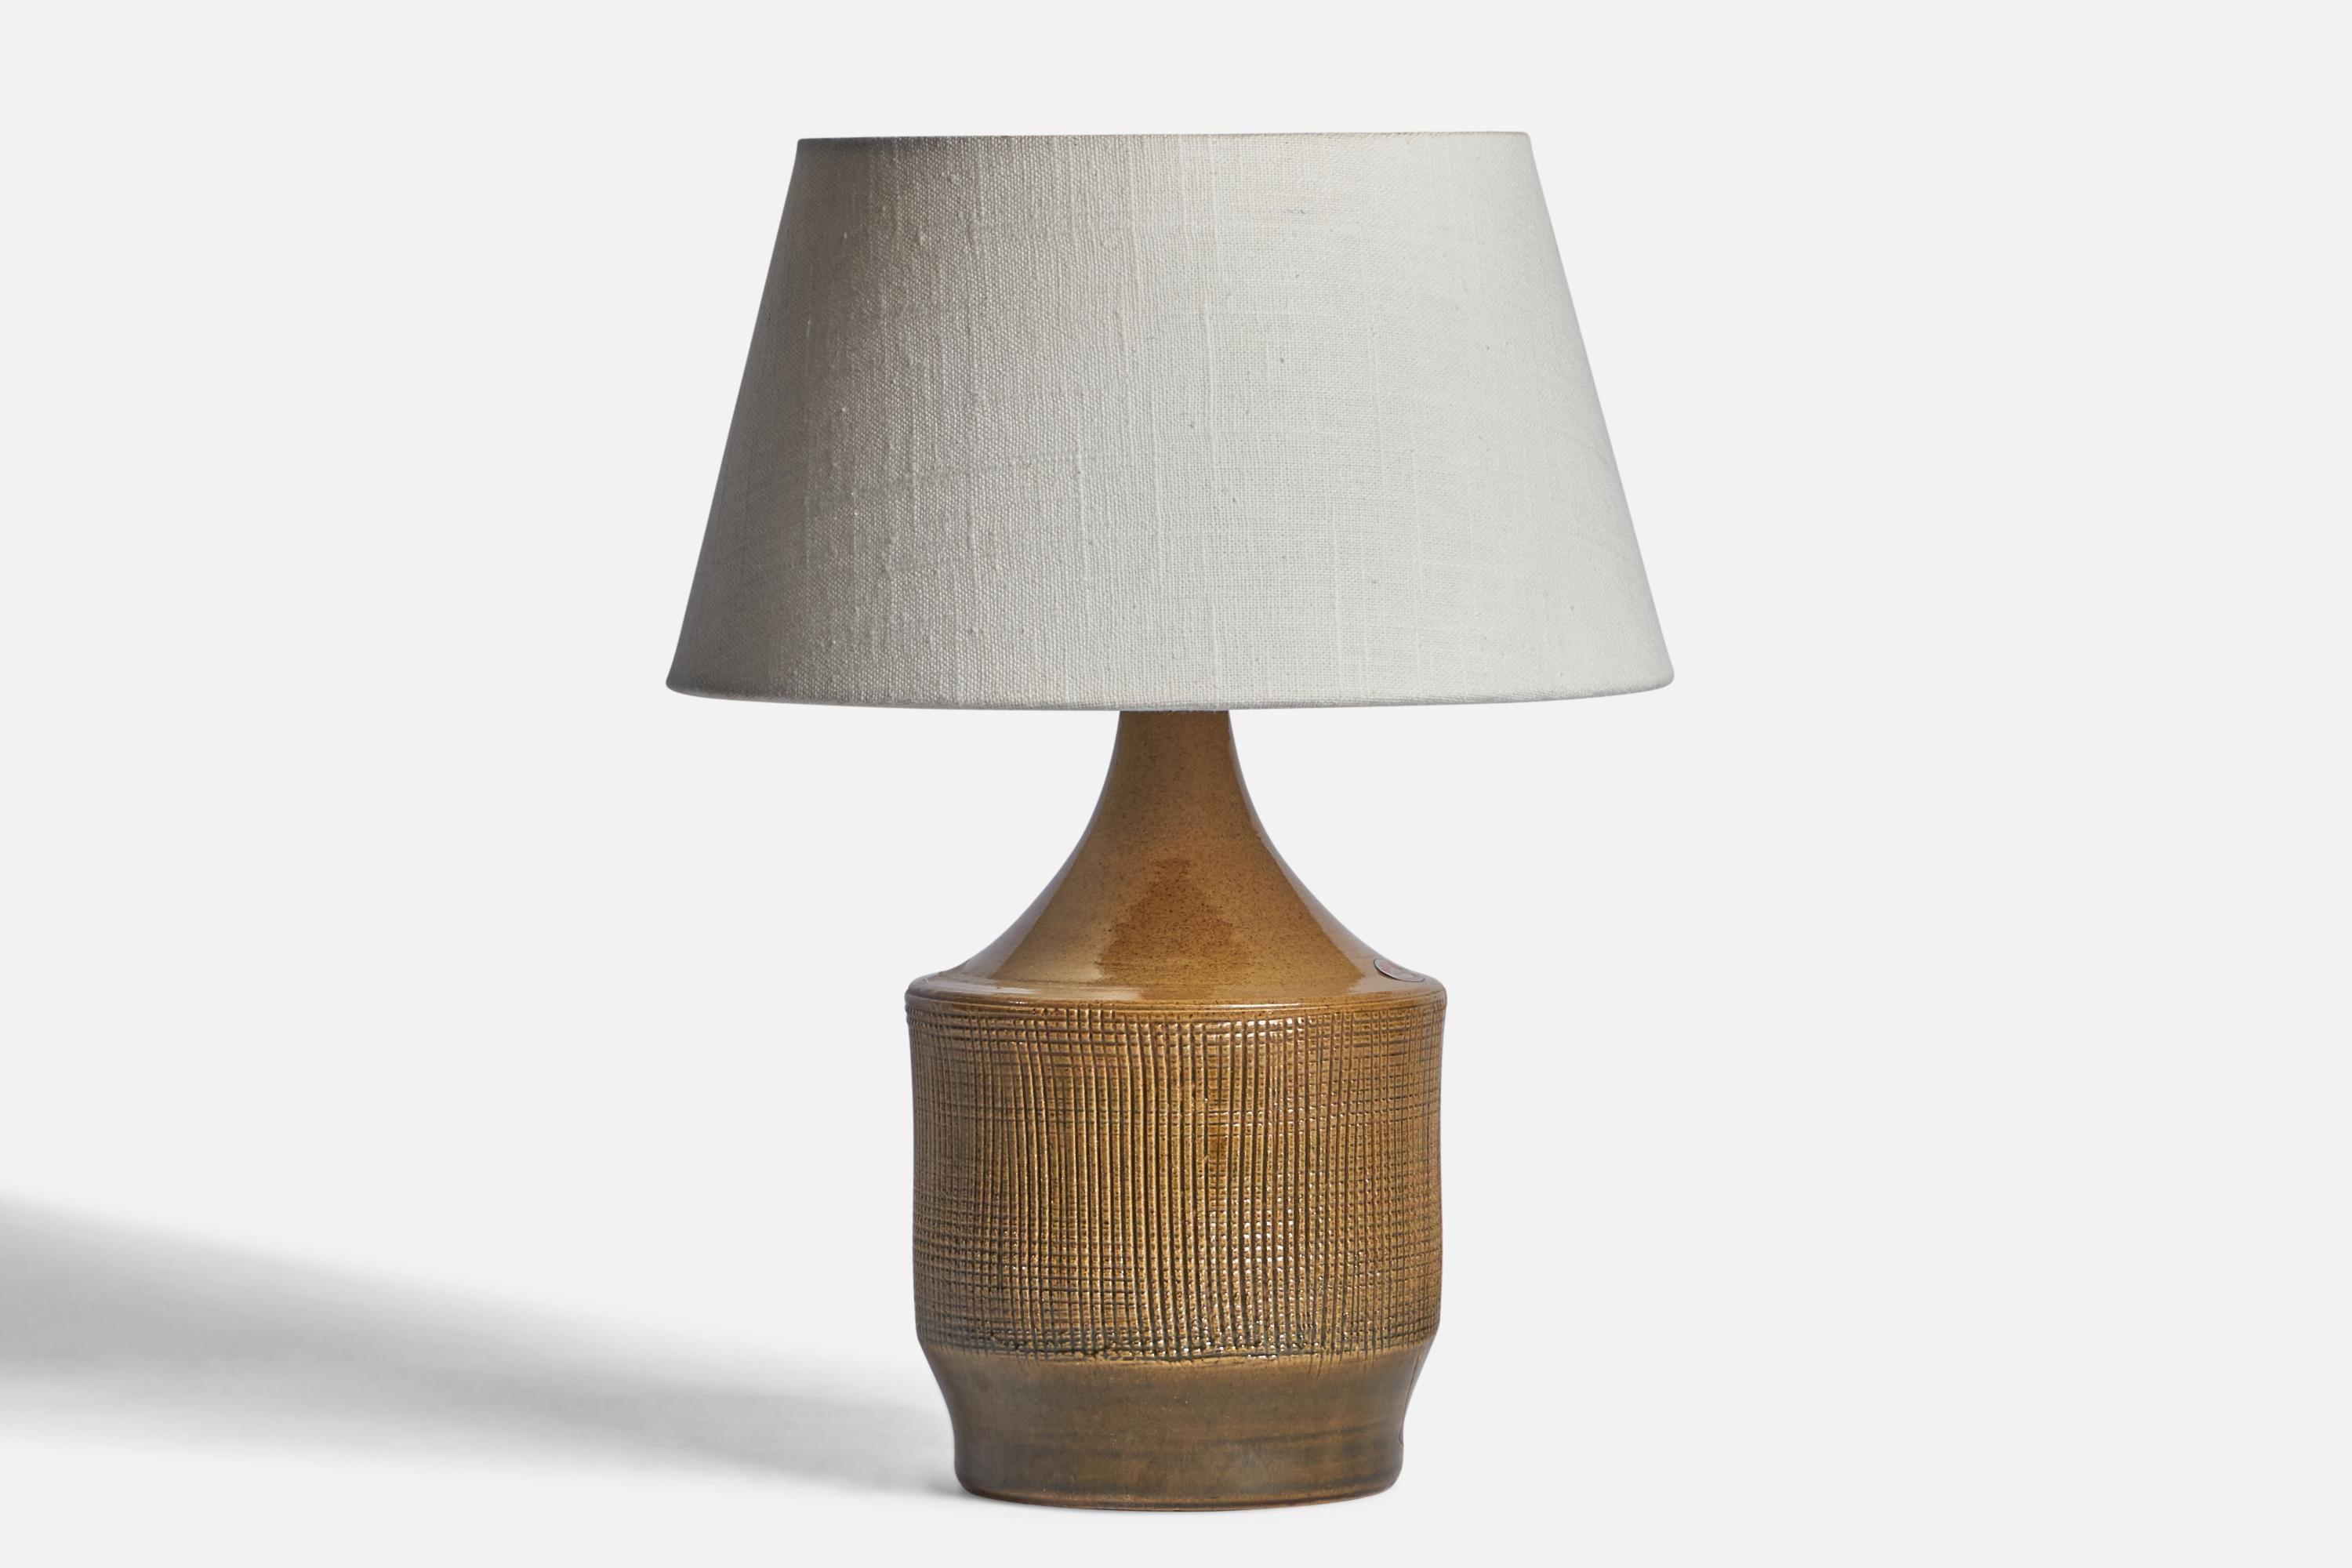 A beige stoneware table lamp designed and produced by Henry Brandi, Vejbystrand, Sweden, c. 1960s.

Dimensions of Lamp (inches): 10.15” H x 5.25” Diameter
Dimensions of Shade (inches): 7” Top Diameter x 10” Bottom Diameter x 5.5” H 
Dimensions of